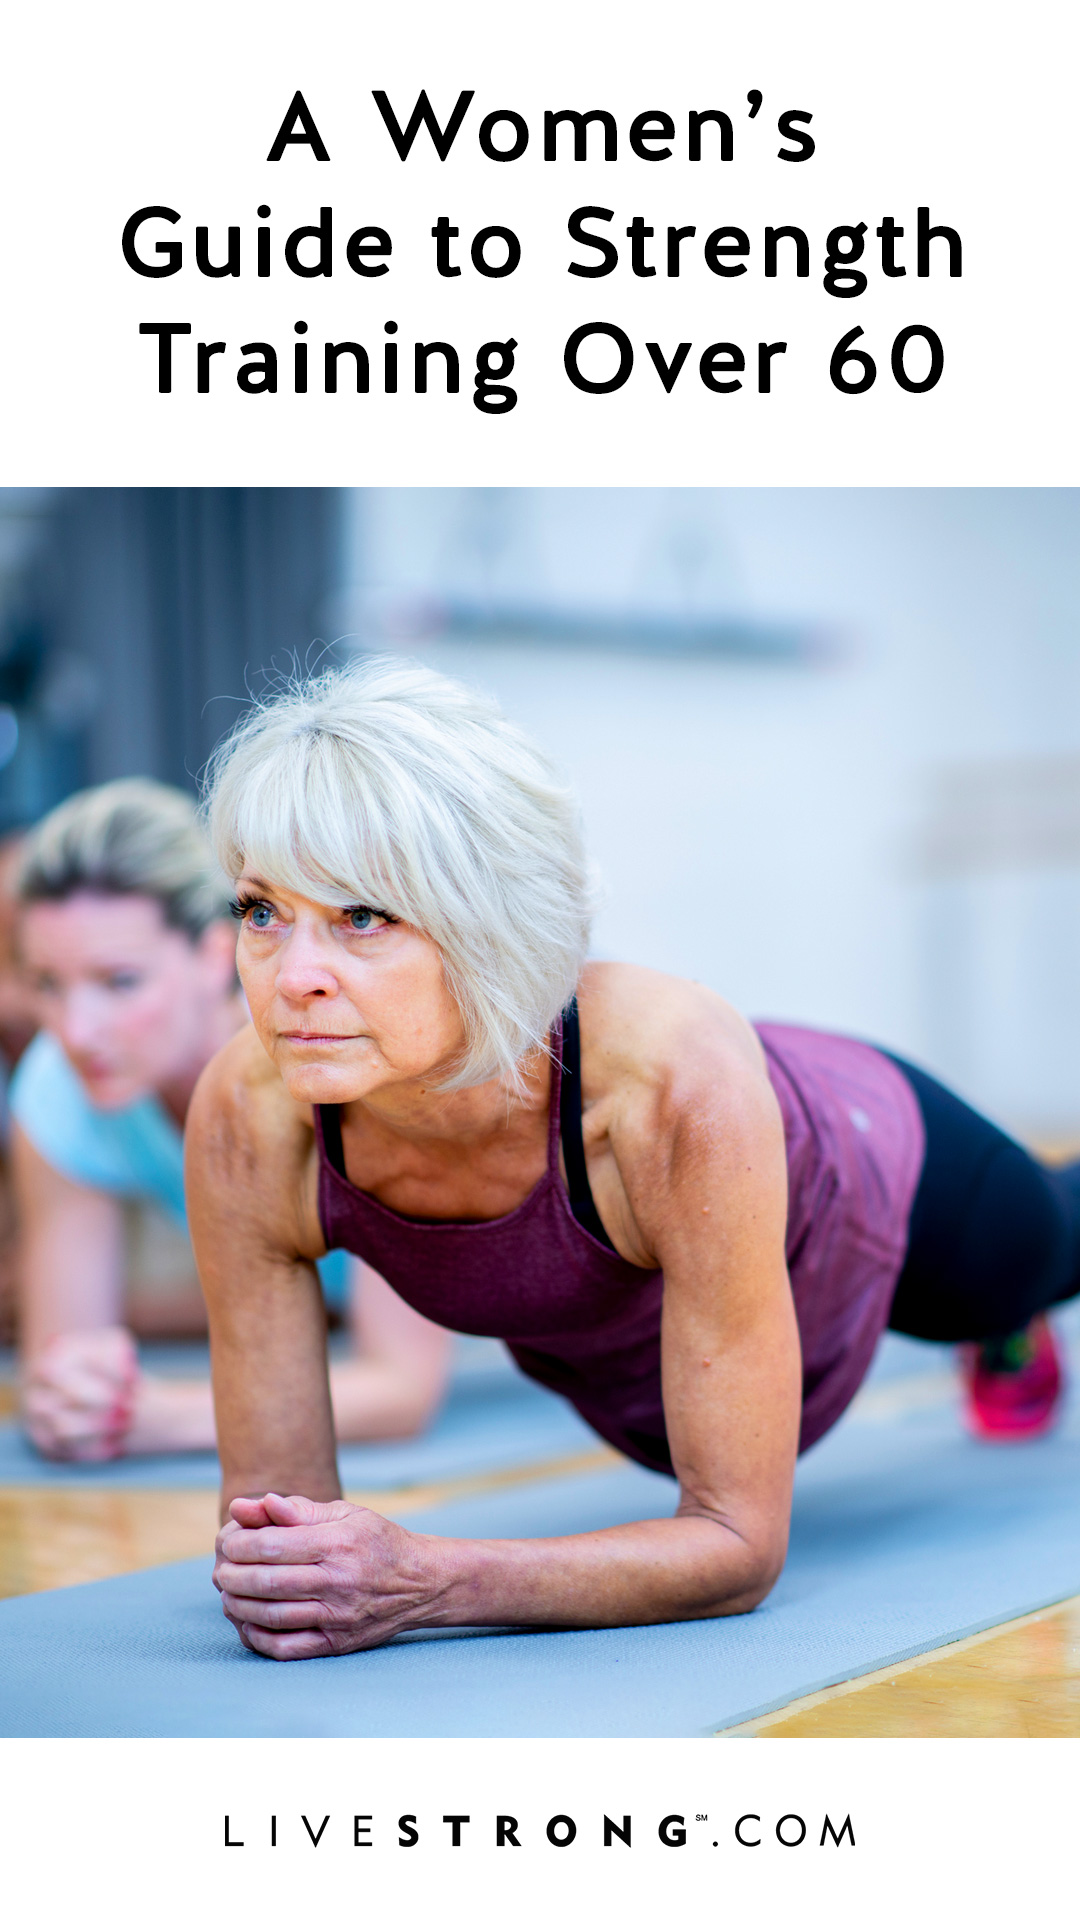 Exercise For Women Over 60: Your Guide to Getting Lean, Strong and